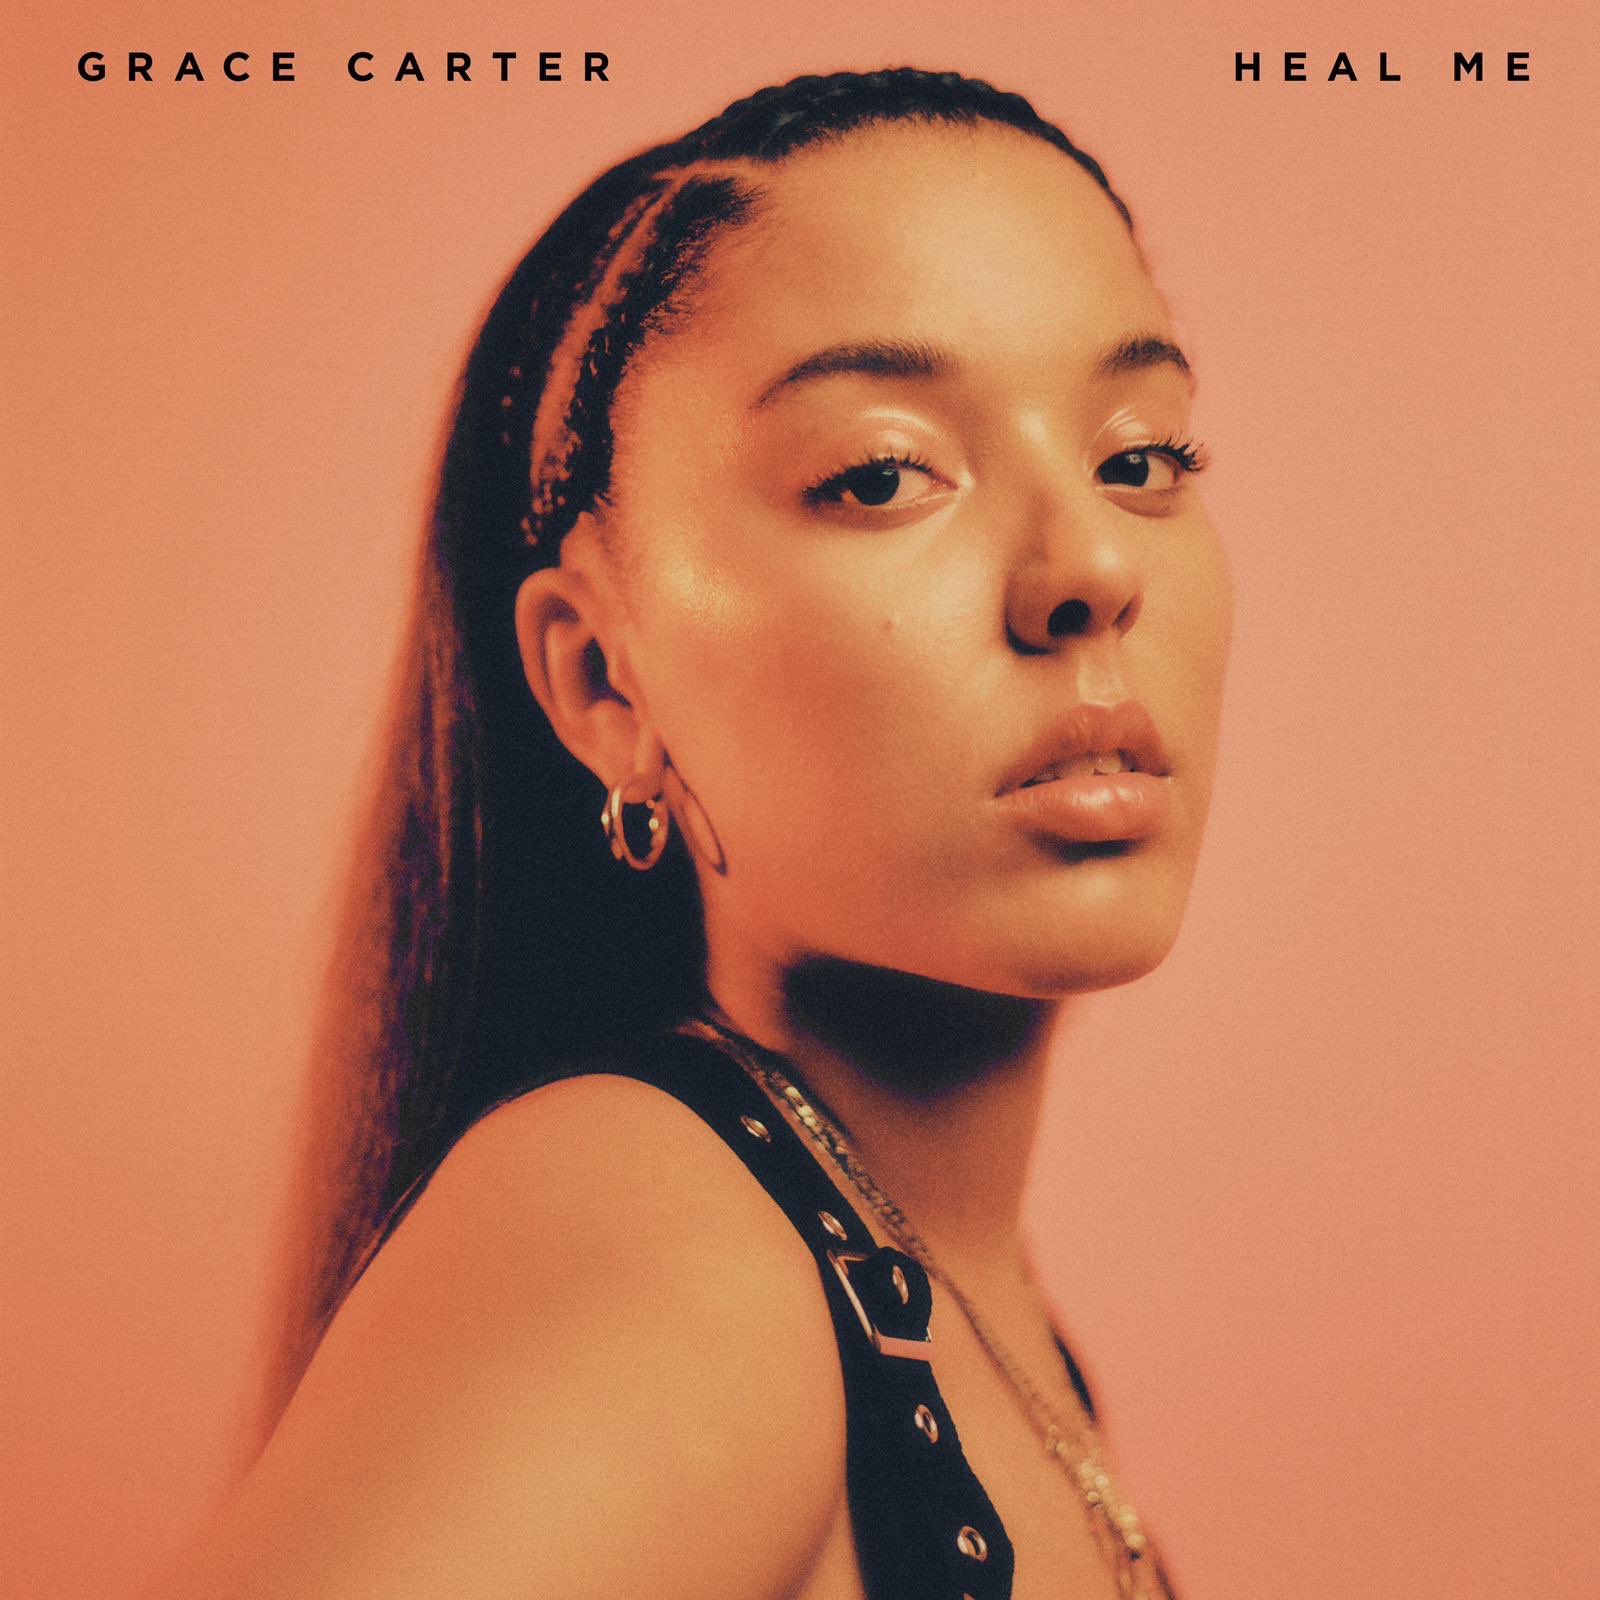 [@itsgracecarter] drops the powerful visuals for her new track ‘Heal Me’